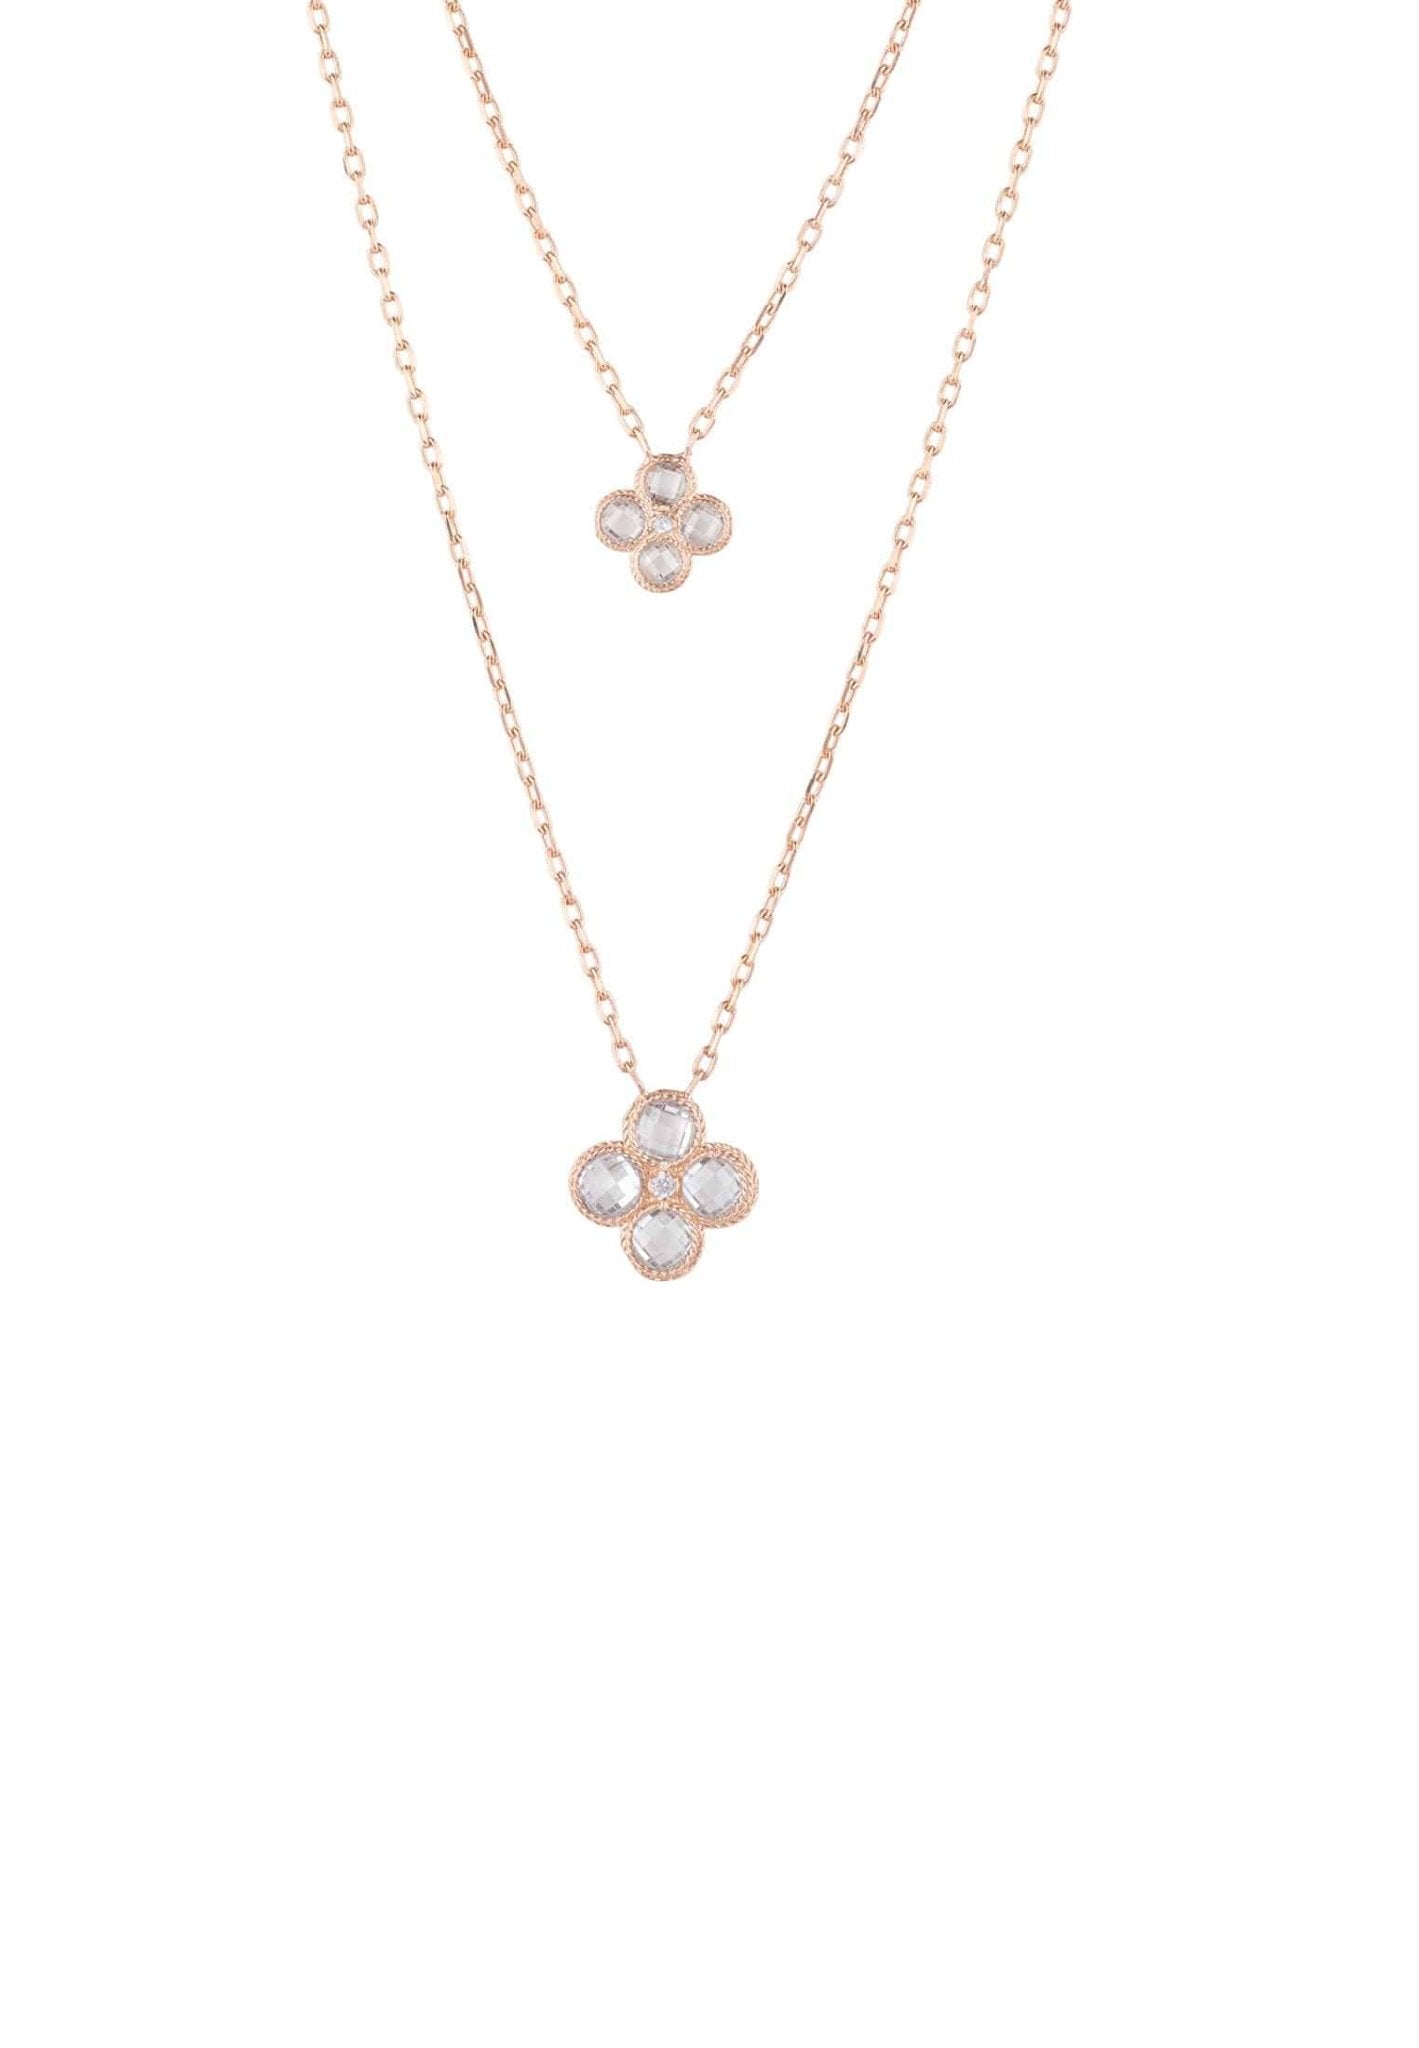 Flower Clover Double Layered Pendant Necklace Rosegold - LATELITA Necklaces